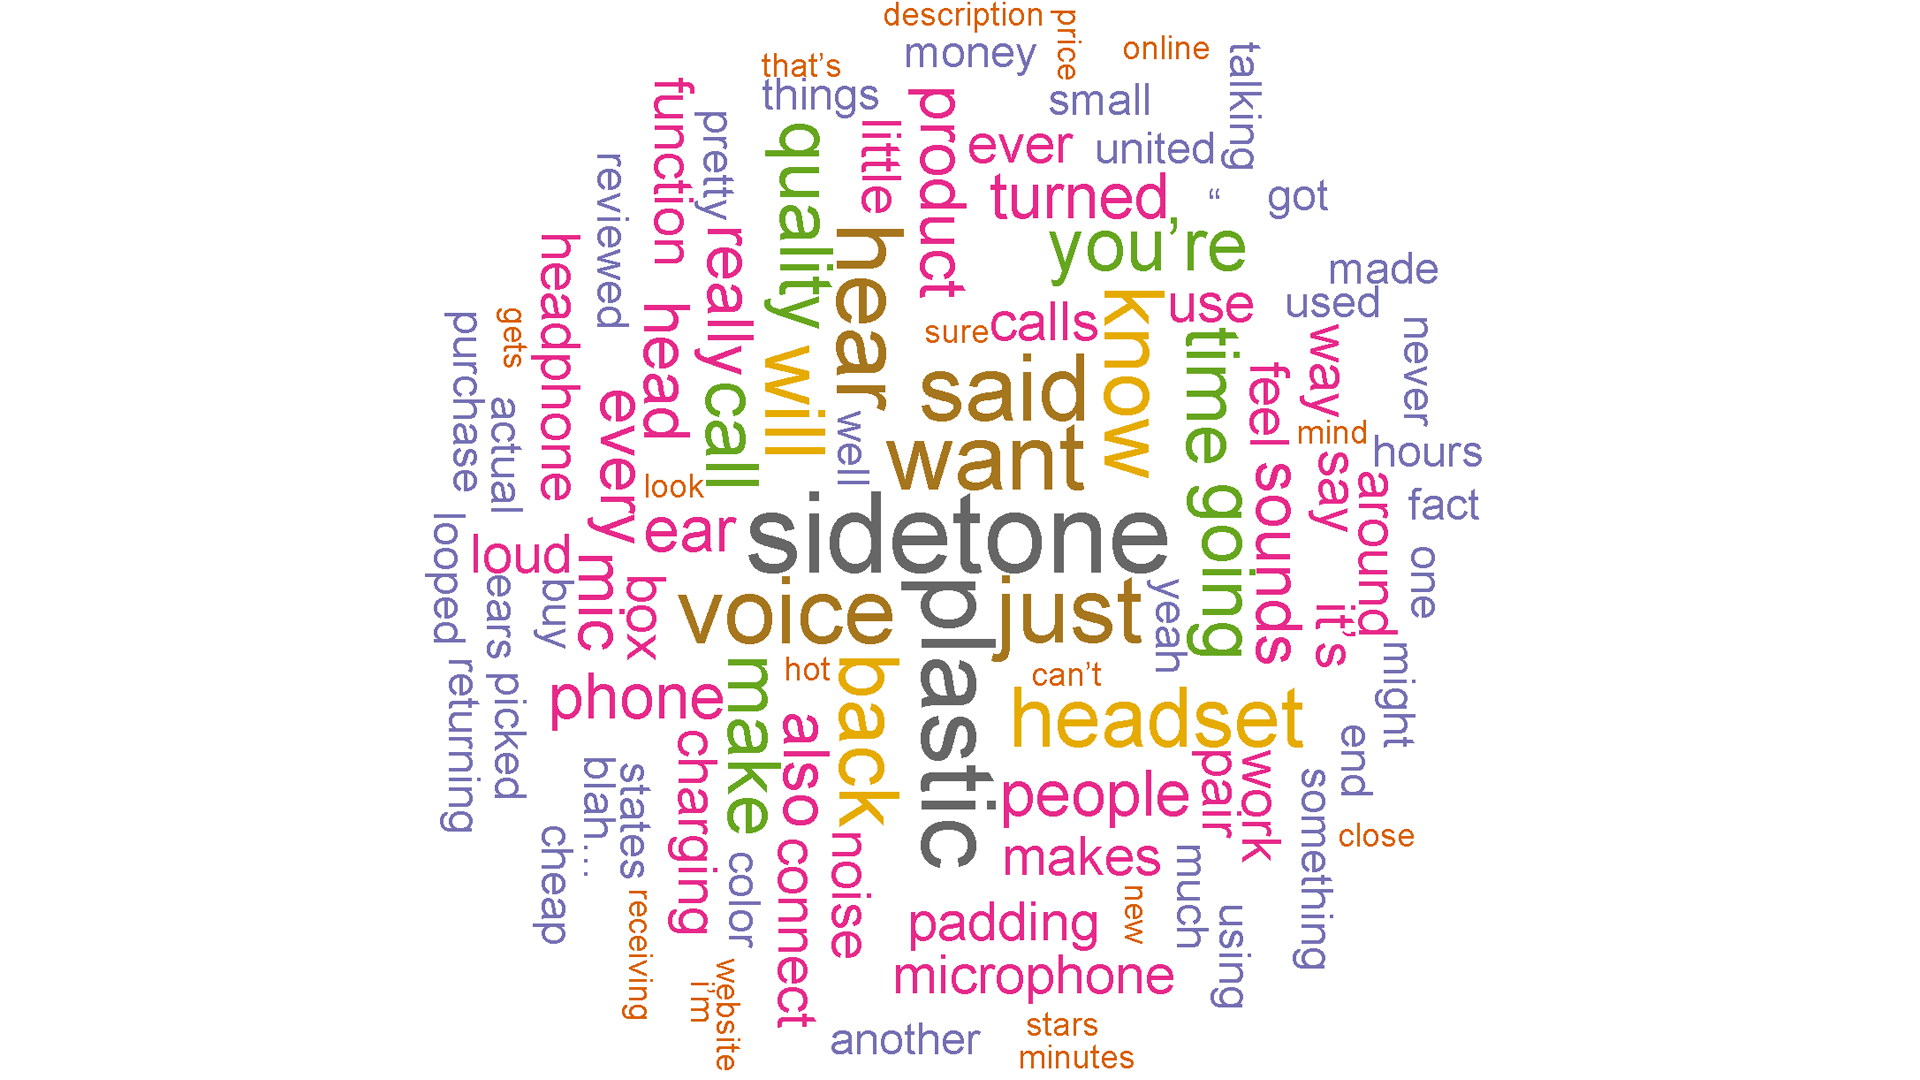 Among the critical reviews on Amazon, Sidetone is the most hated feature.